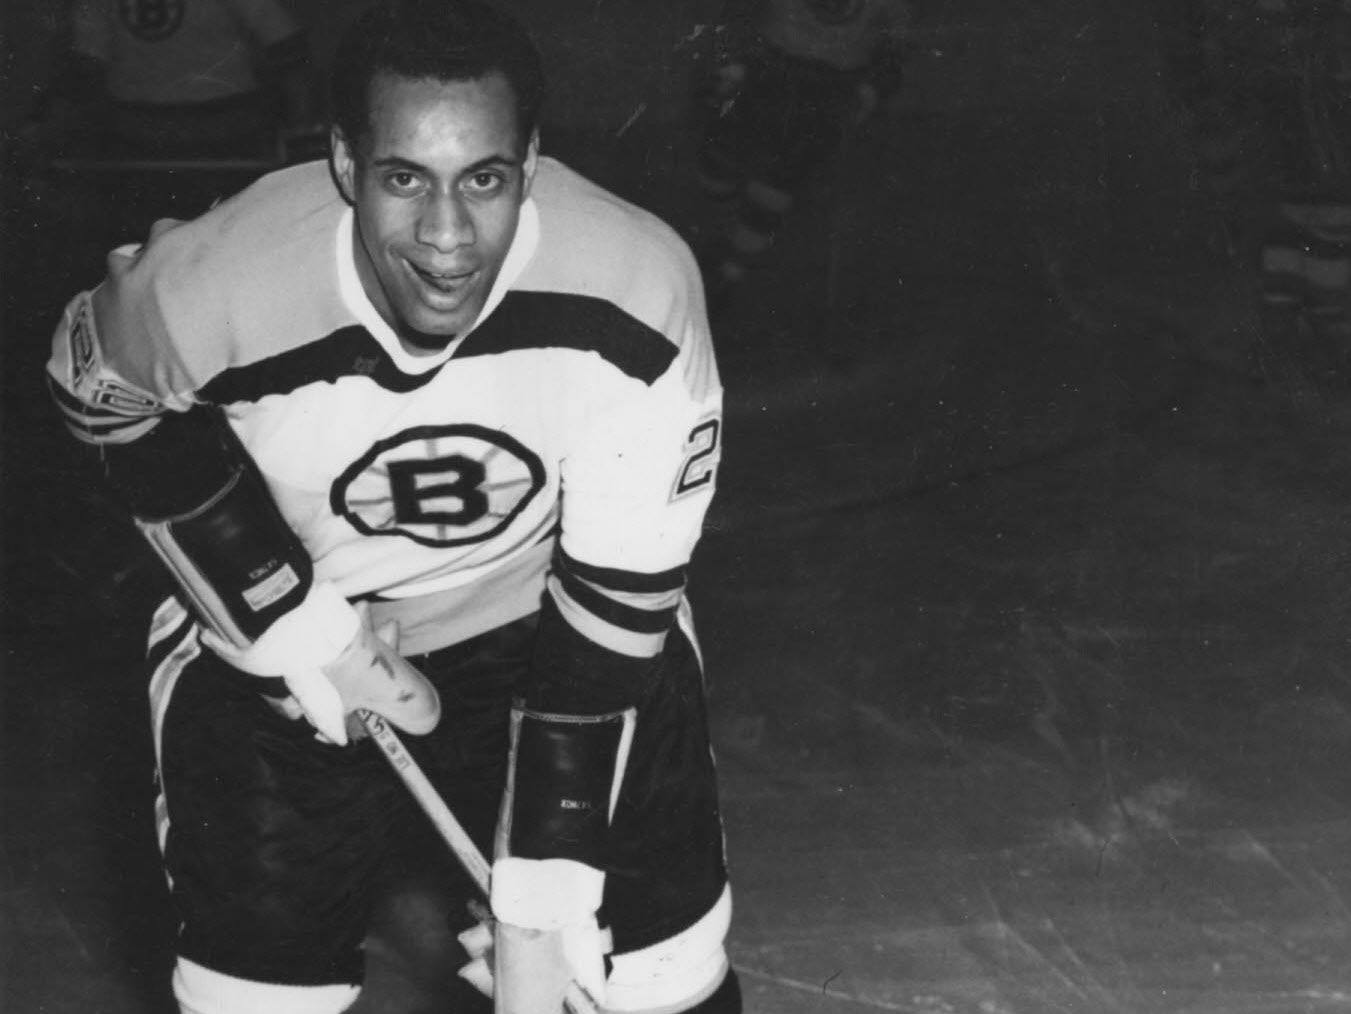 New Brunswick's Willie O'Ree says having Bruins retire jersey an